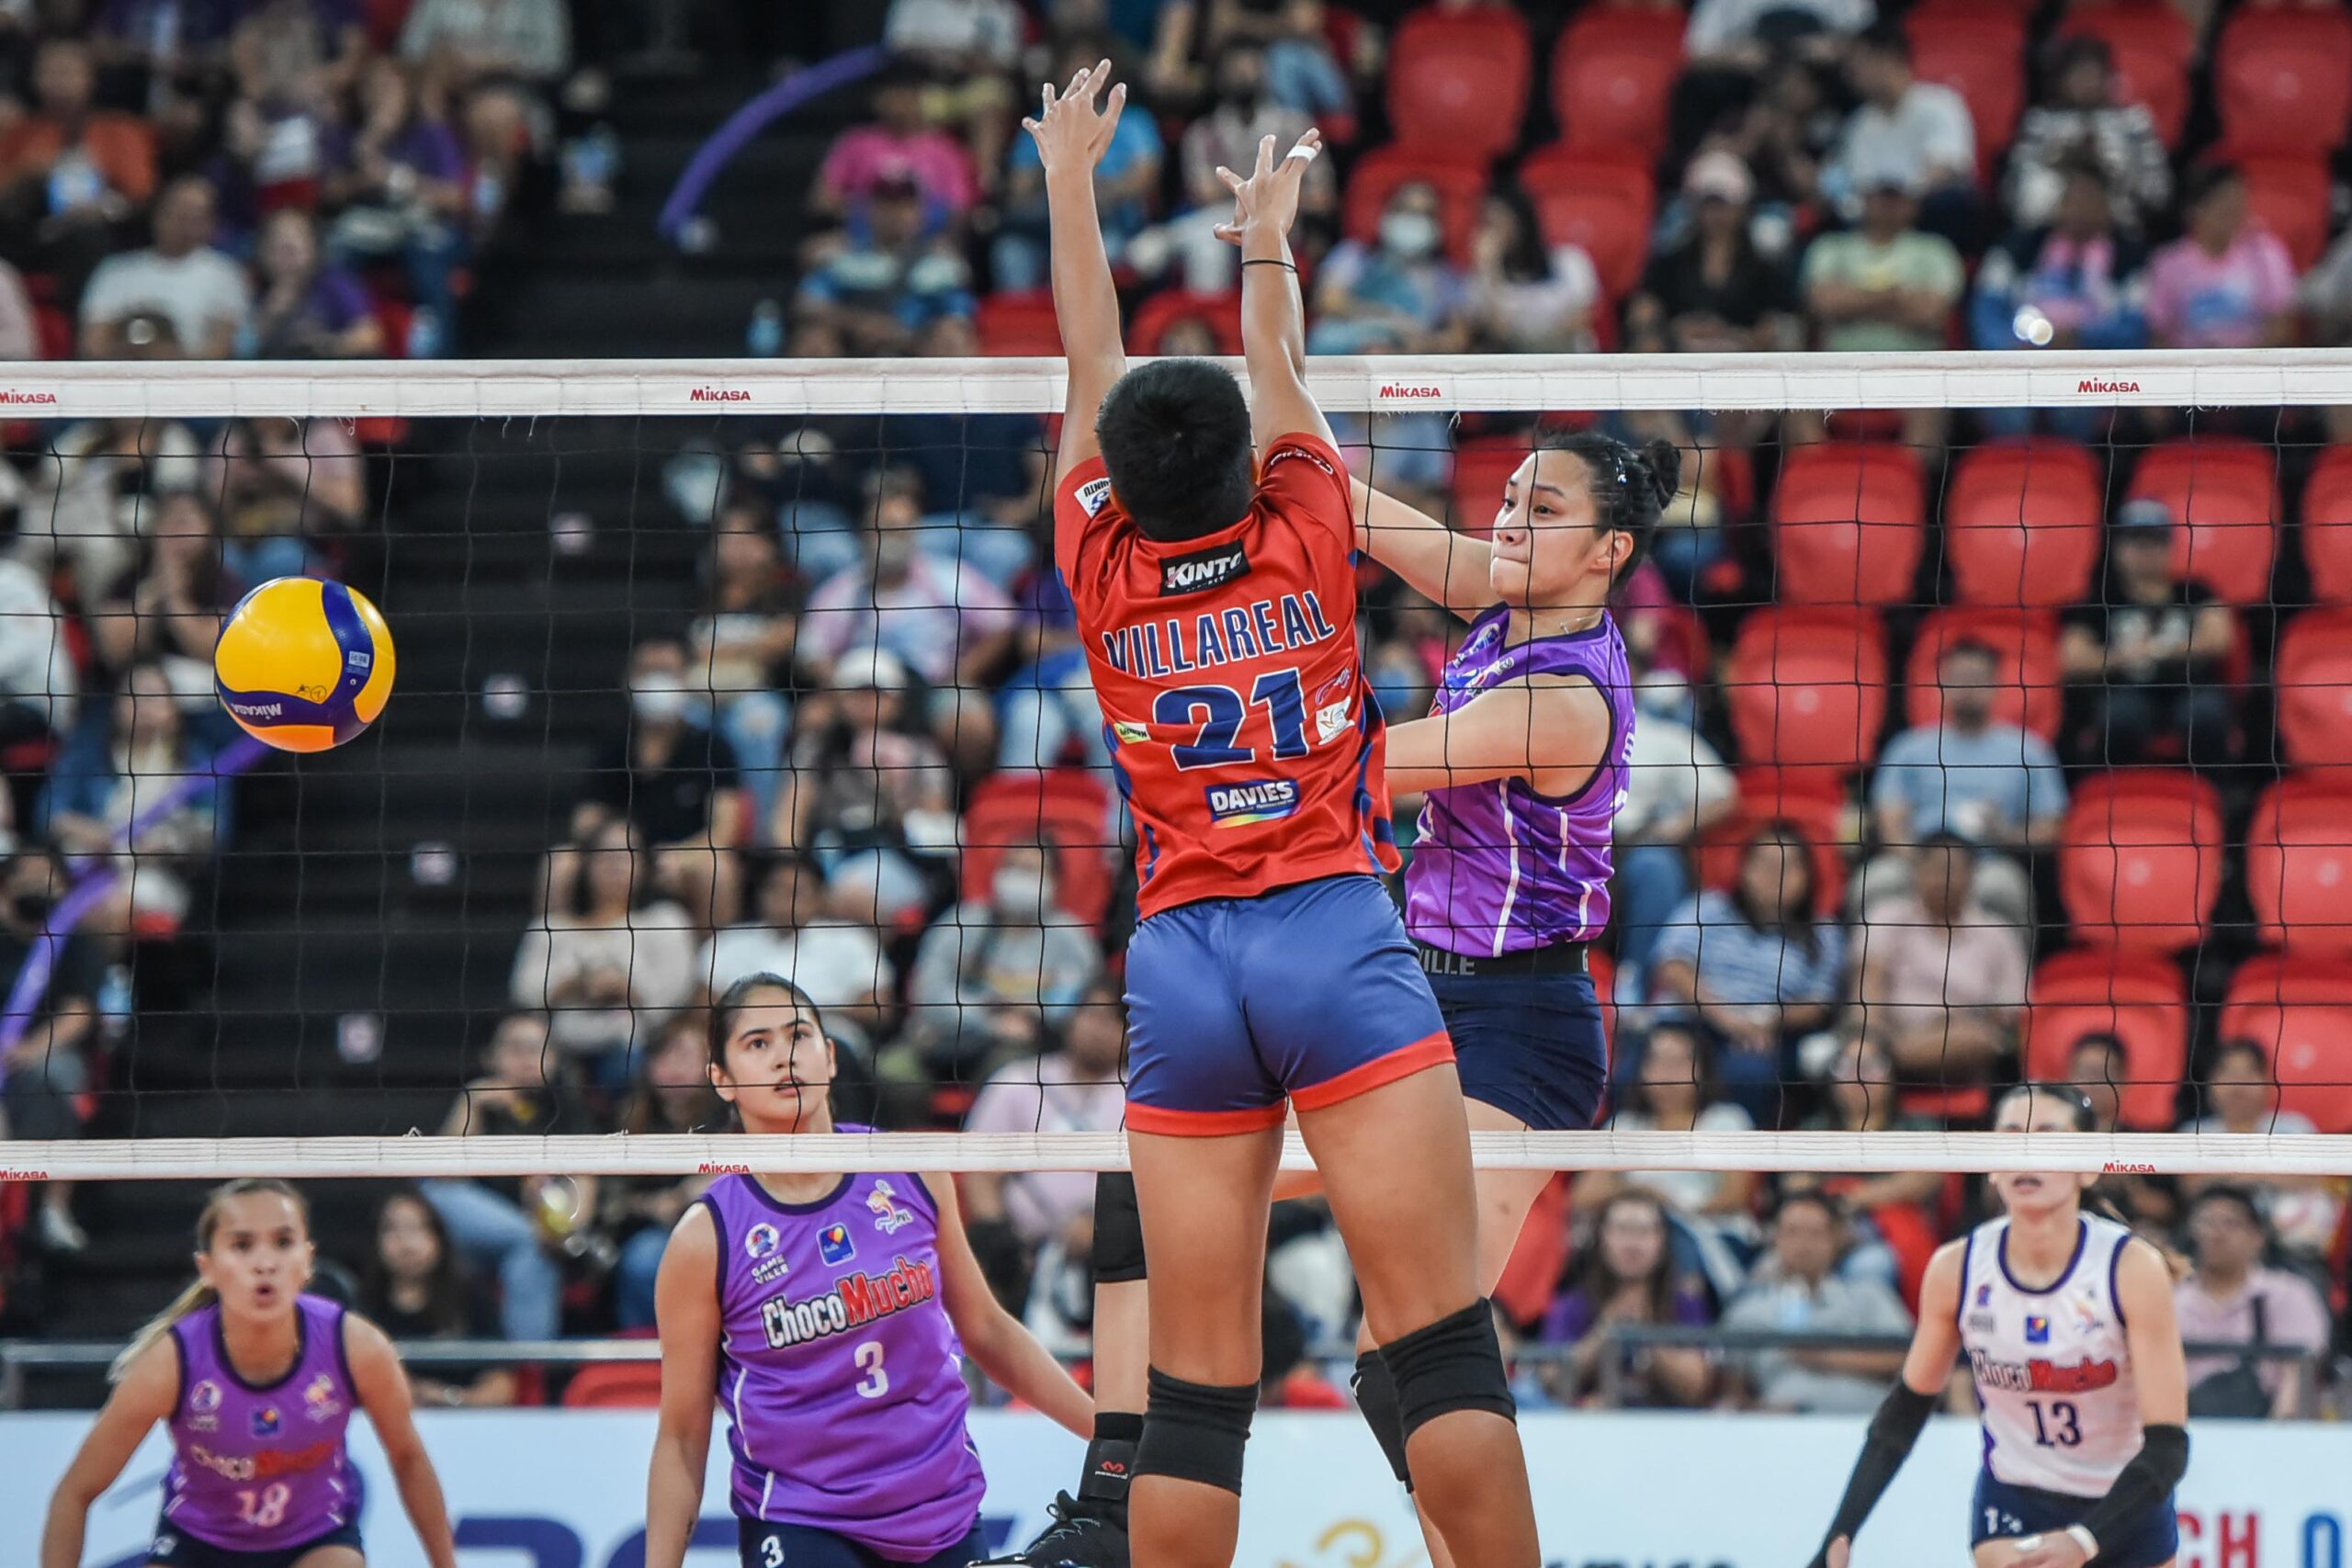 PVL-AFC-Choco-Mucho-vs.-Gerflor-Bea-De-Leon-3697-scaled Bea De Leon's confidence soars after morale-boosting outing vs Gerflor News PVL Volleyball  - philippine sports news